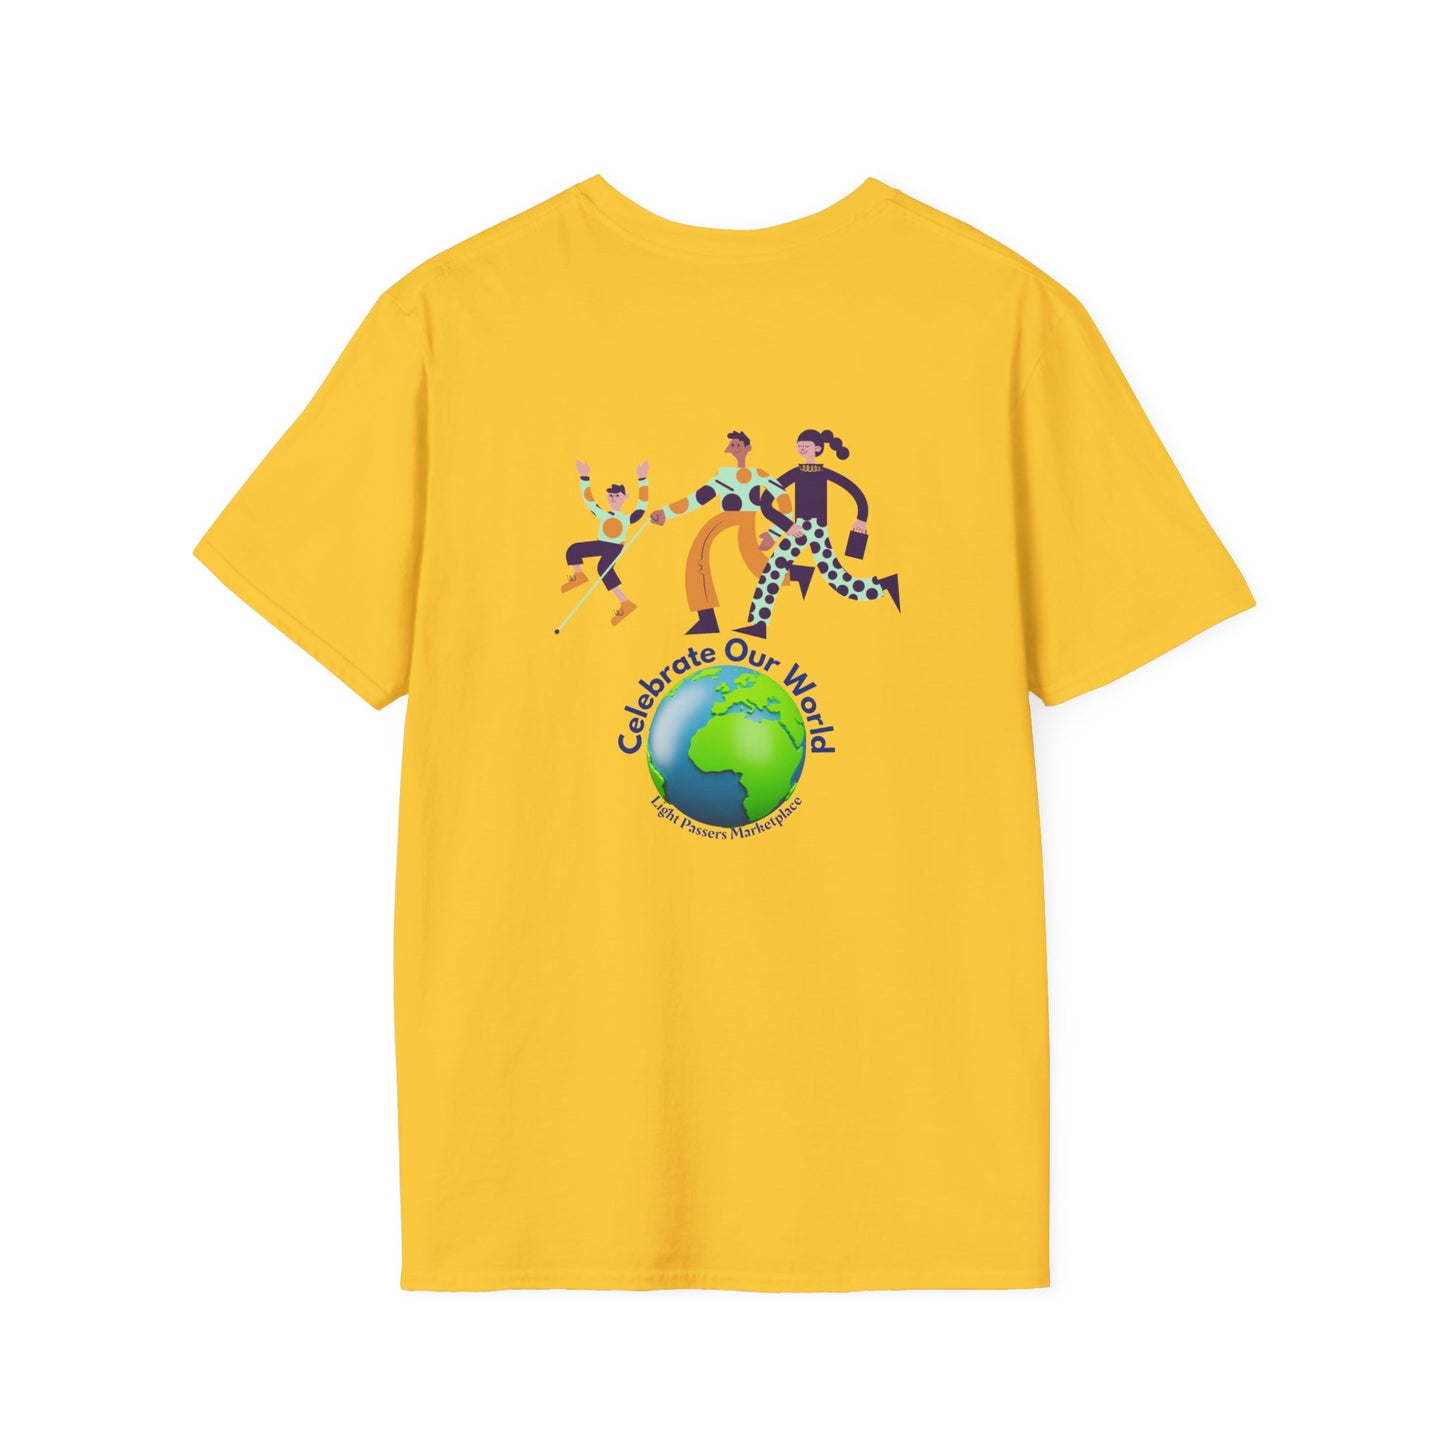 A yellow unisex t-shirt featuring a globe and people graphic. Made of soft 100% cotton with twill tape shoulders for durability and ribbed collar. Ethically sourced and Oeko-Tex certified.